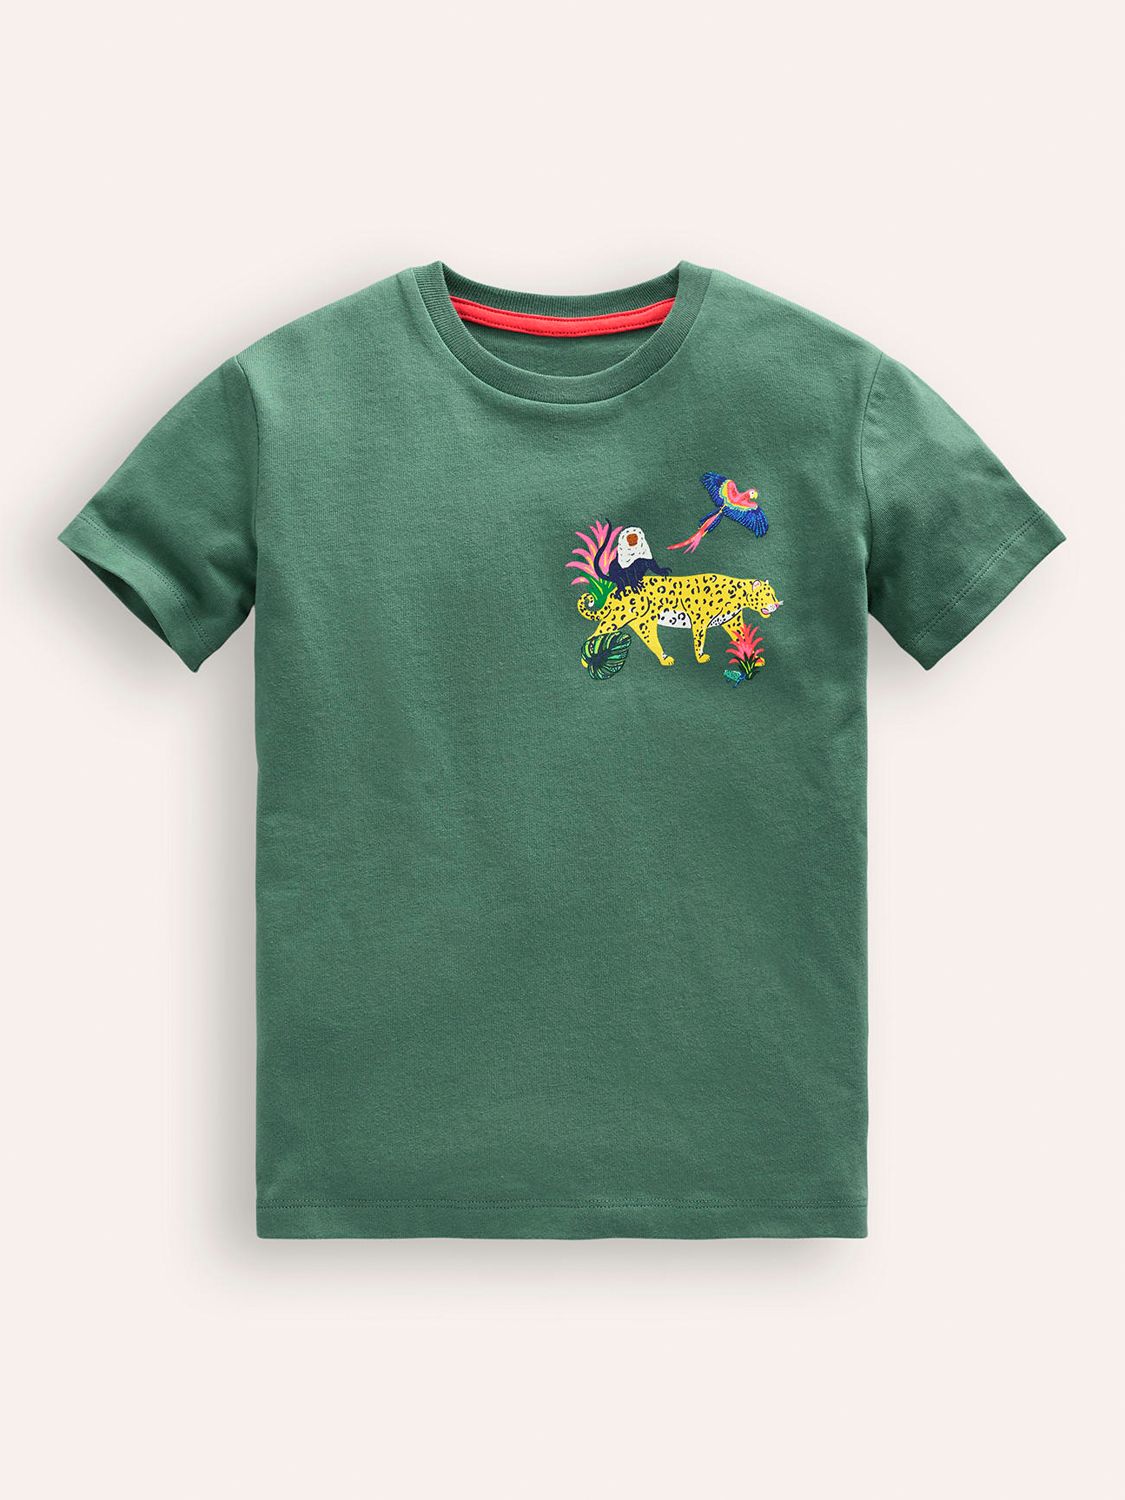 Mini Boden Kids' Front & Back Amazon Print T-Shirt, Spruce Green, 2-3 years